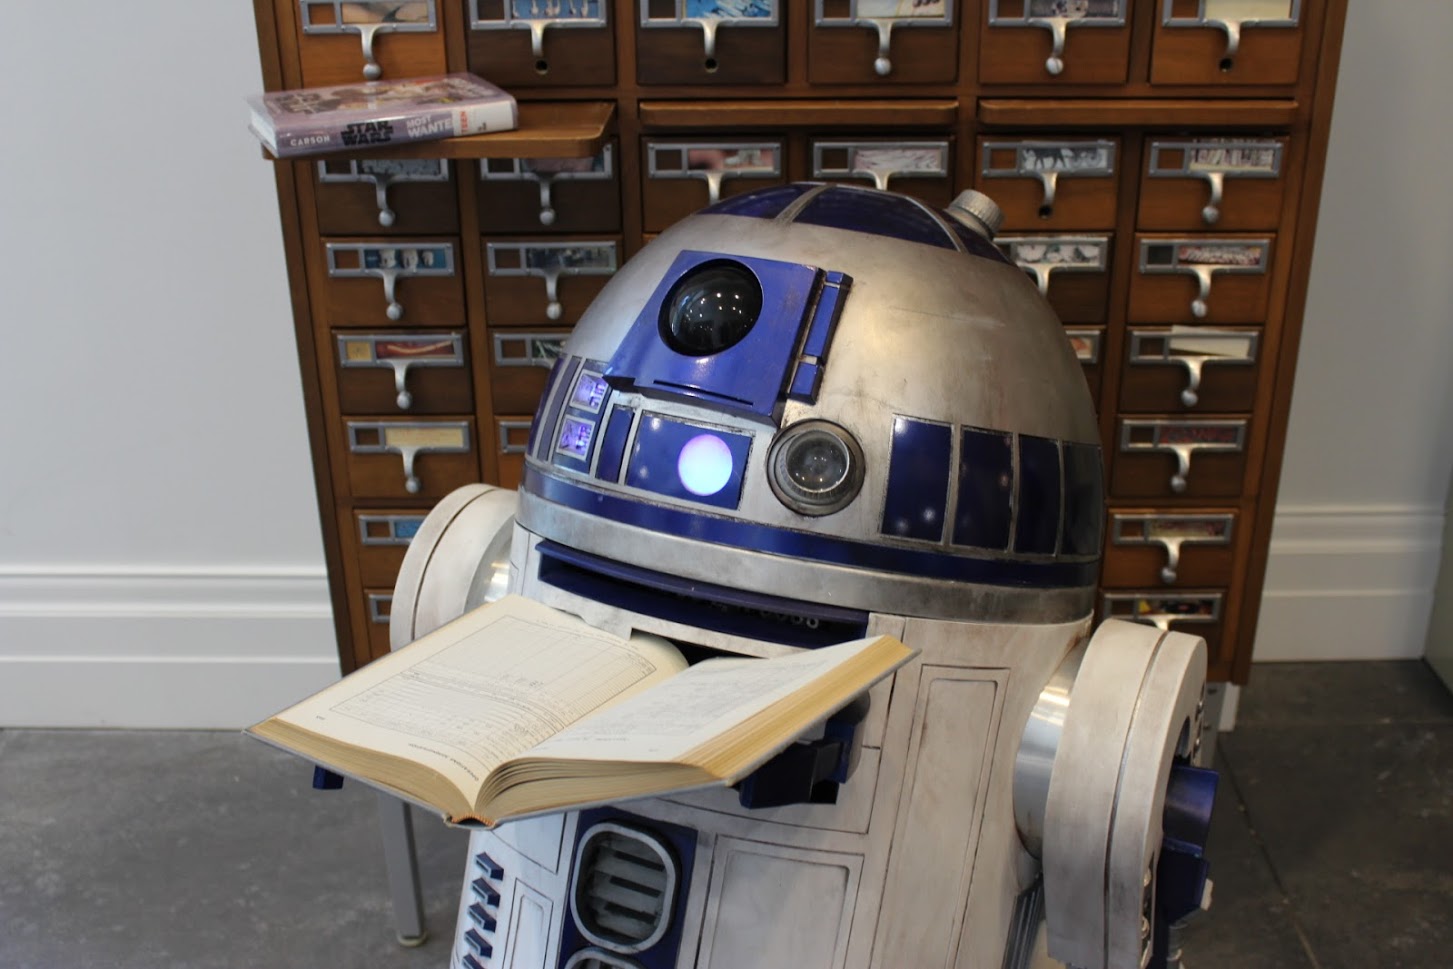 R2-D2 holding a book in front of an old card catalog